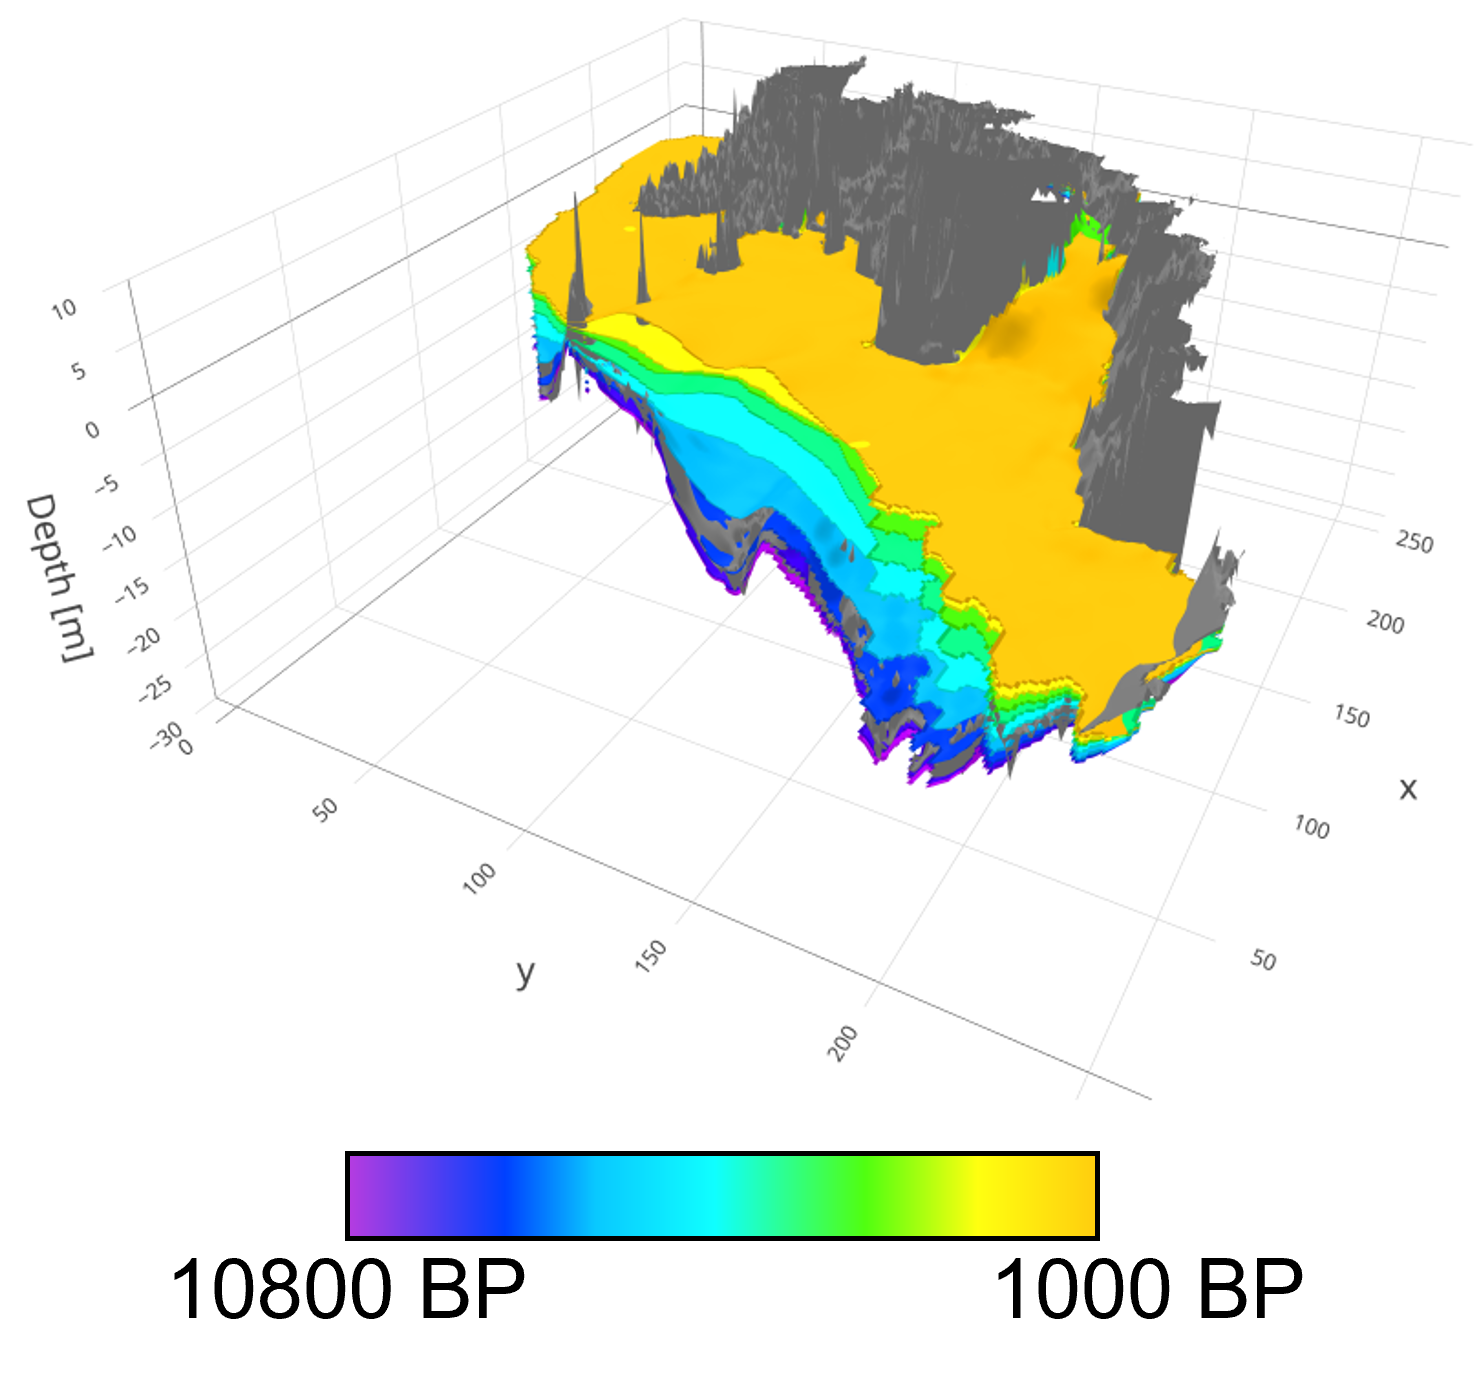 3D visualisation of Holocene groundwater levels in the Netherlands